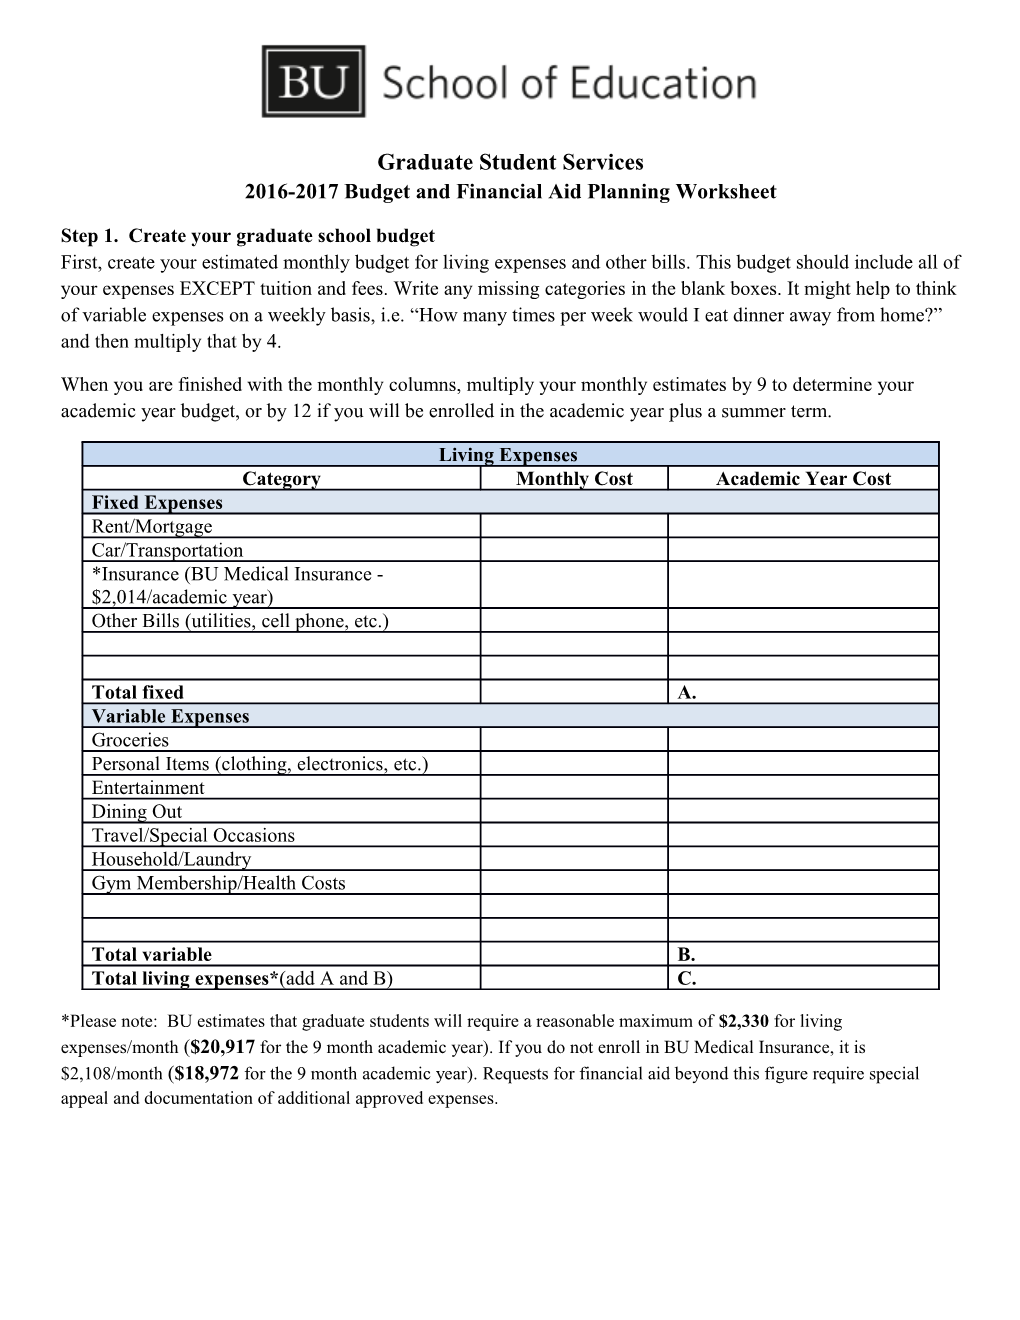 Graduate Student Services 2016-2017 Budget and Financial Aid Planning Worksheet